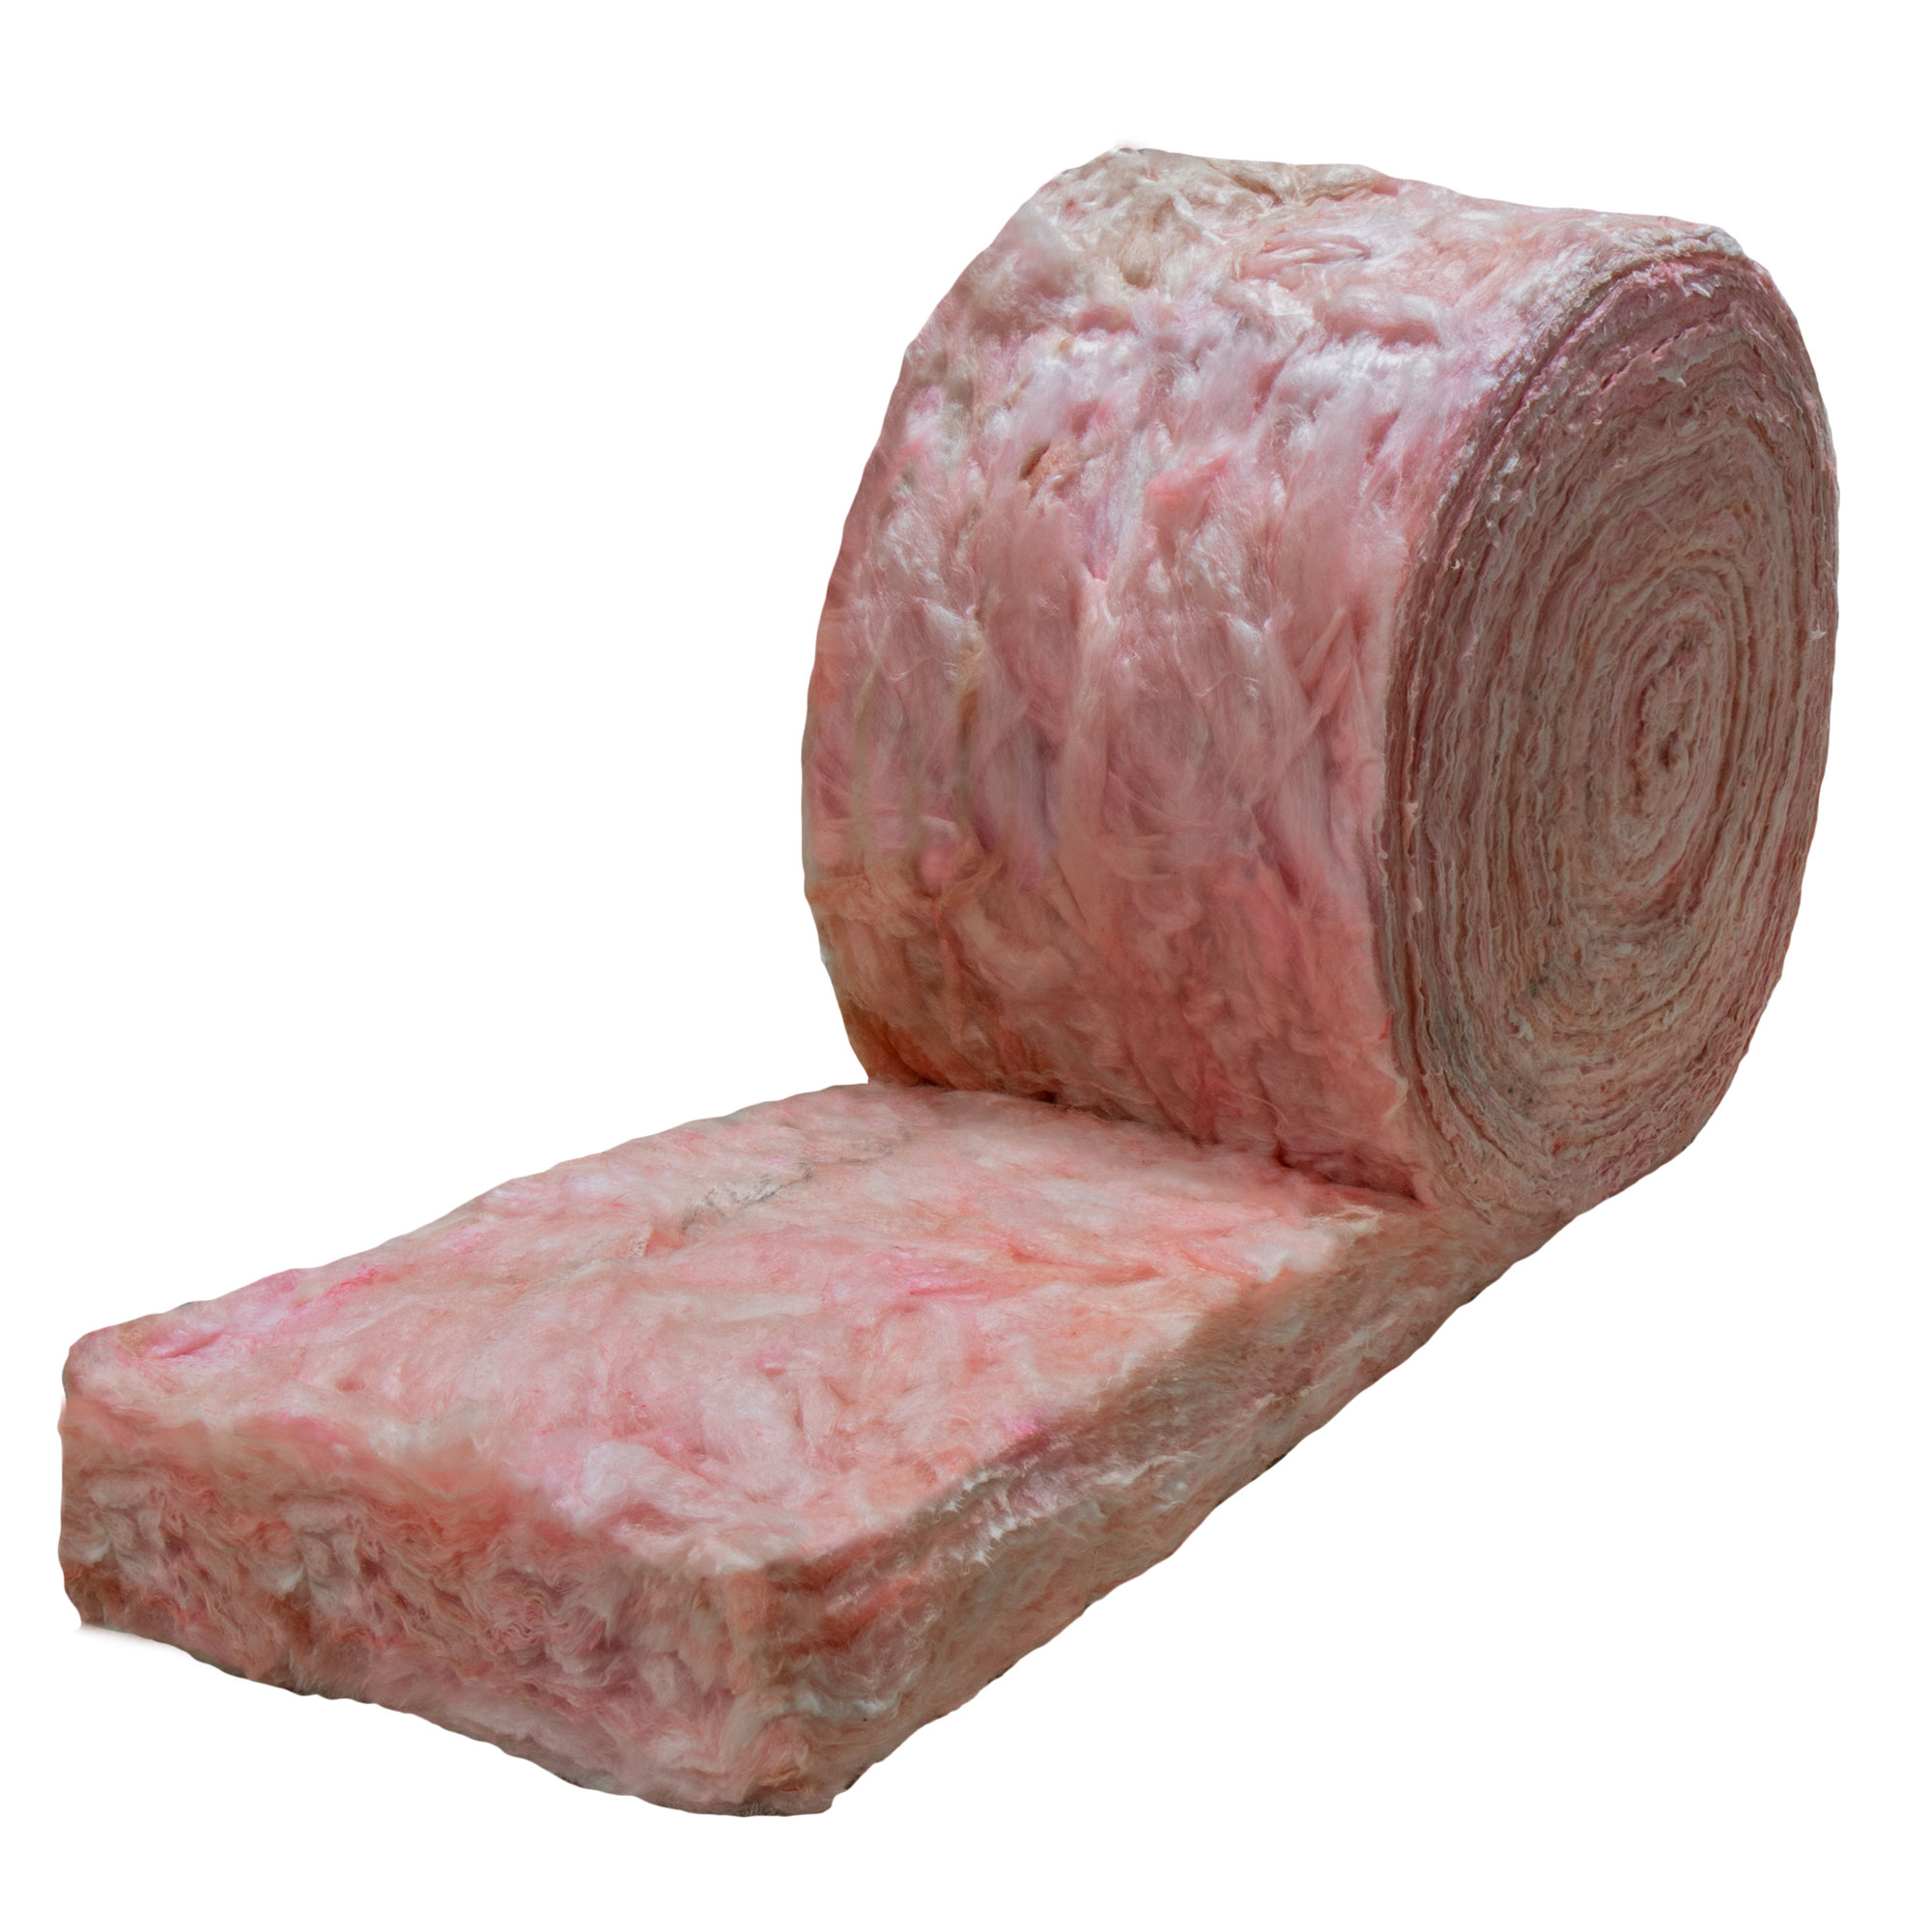 https://cdn11.bigcommerce.com/s-kwuh809851/images/stencil/original/products/2108/17983/RP-1169-Pink-Insulation-Roll-3-4__18081.1600091352.jpg?c=2